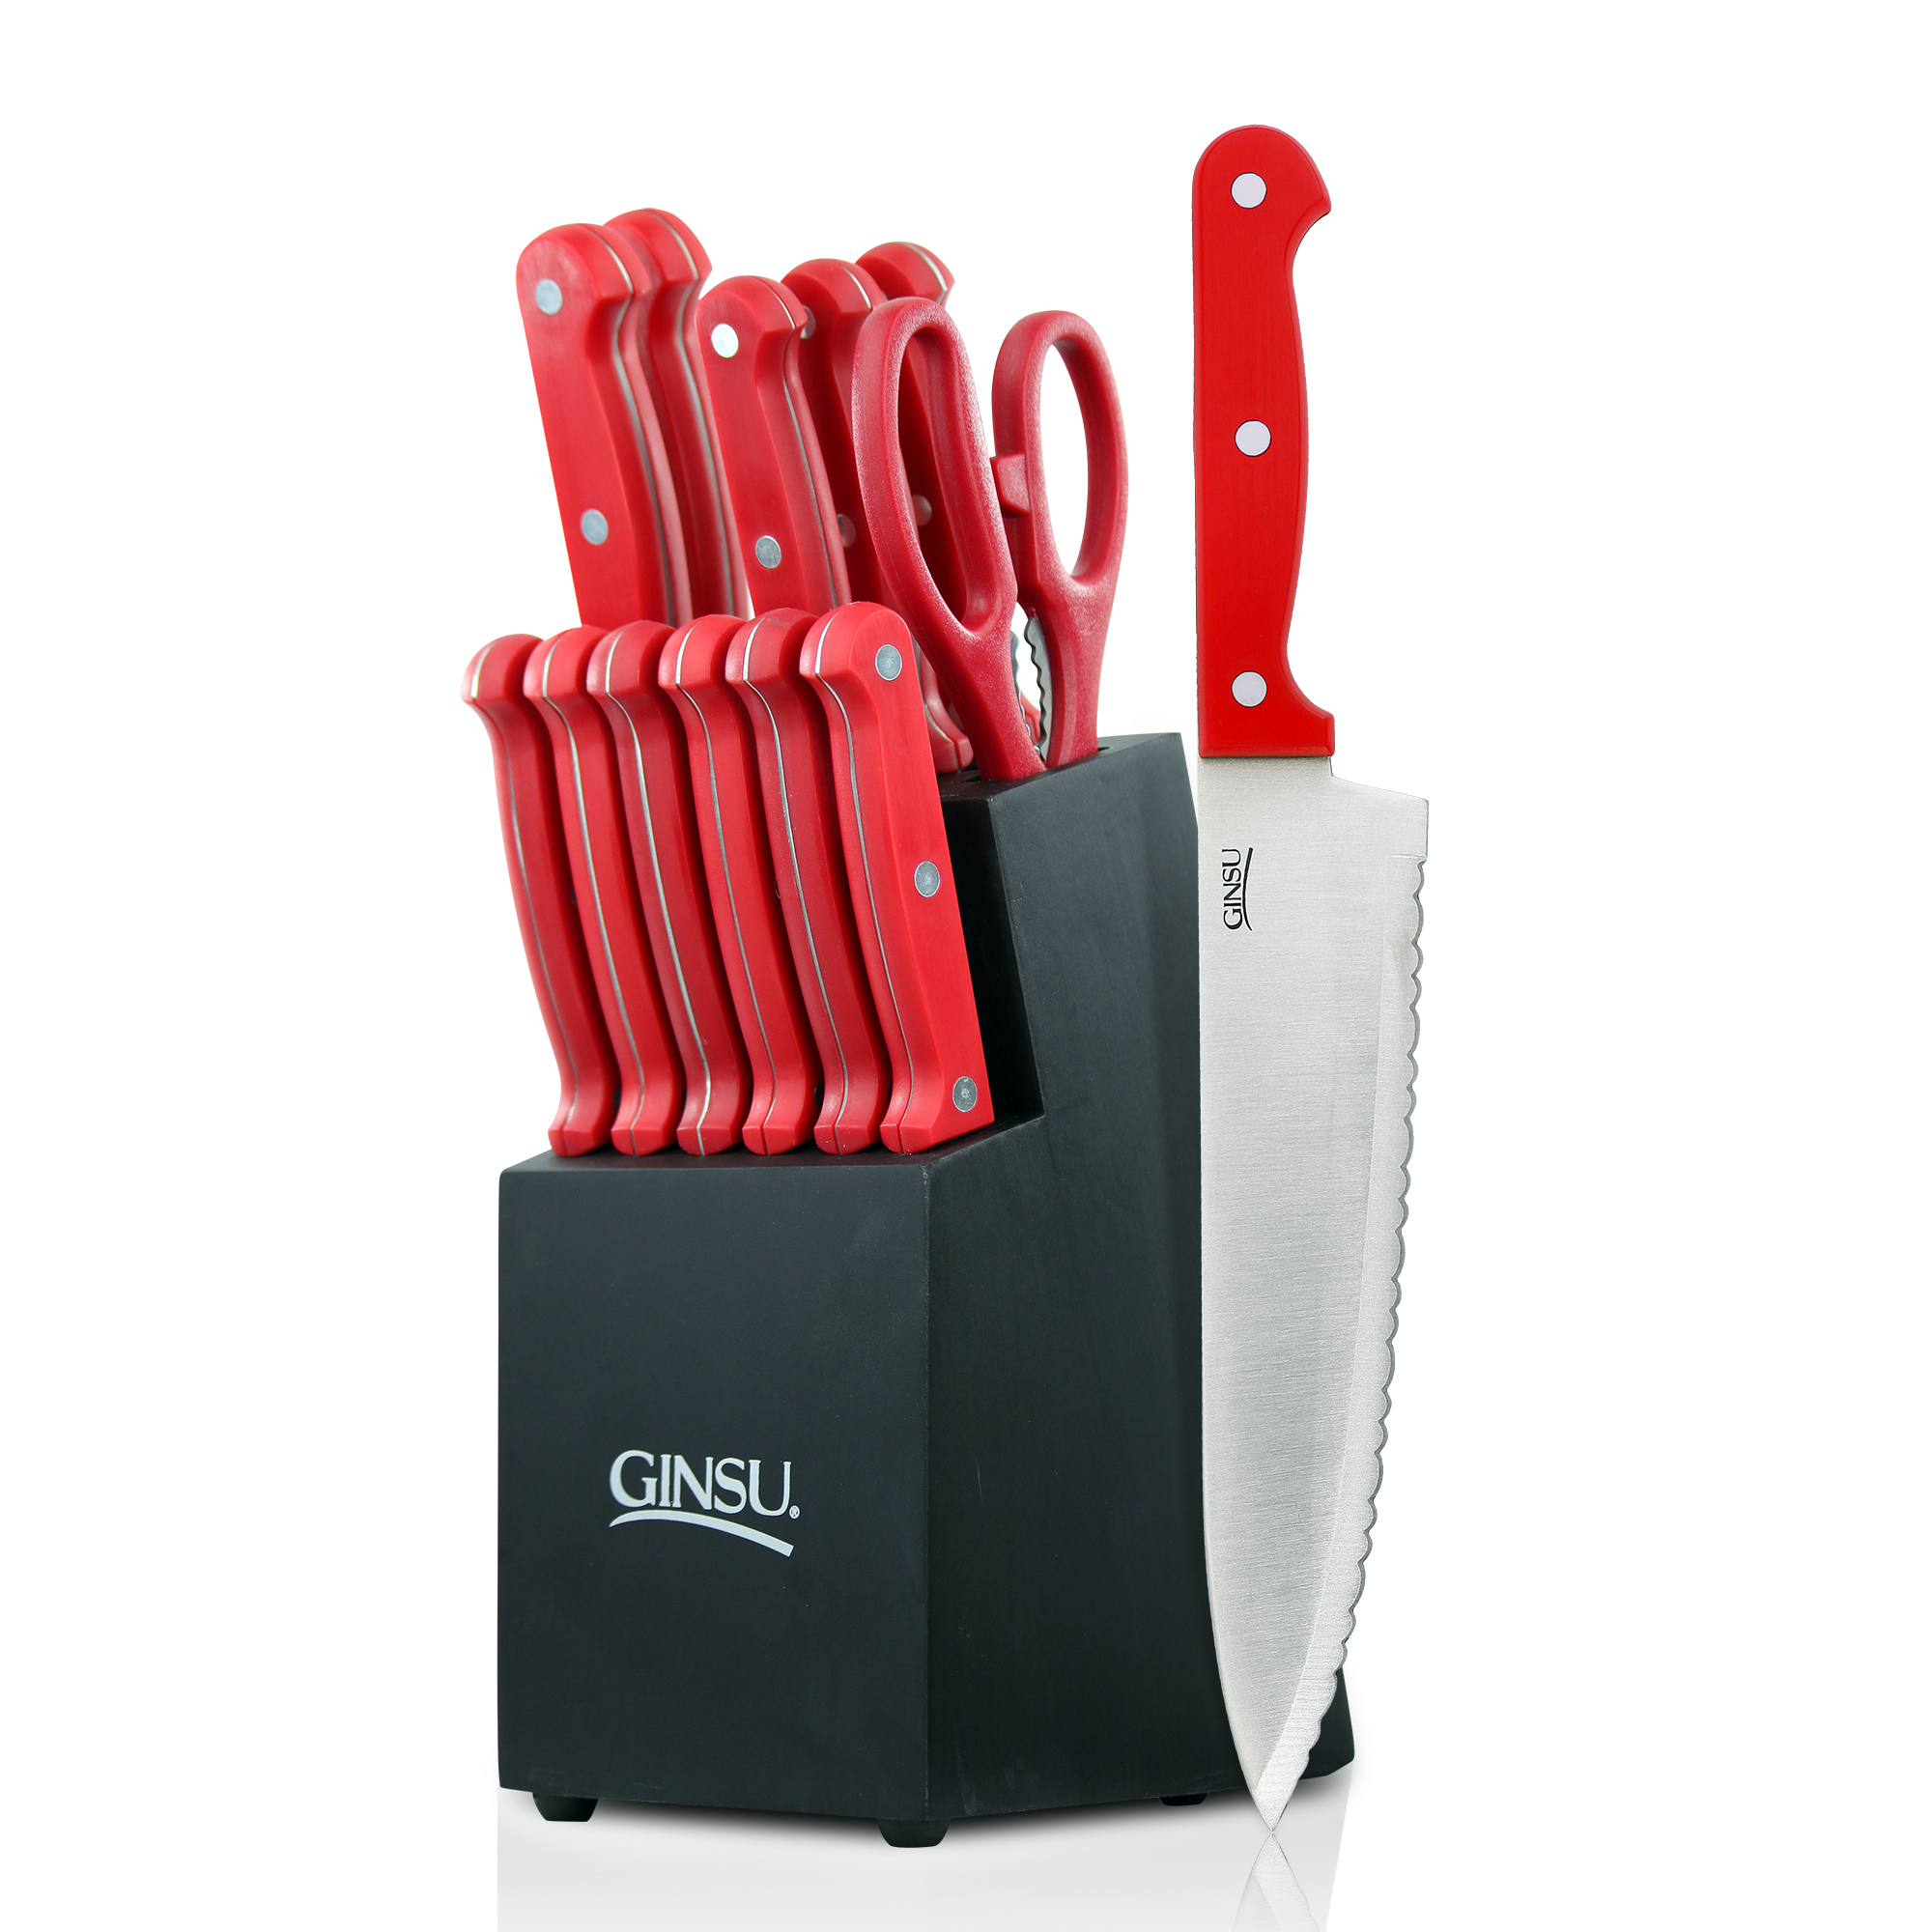 Ginsu Essential Series 14-Piece Stainless Steel Serrated Knife Set - Cutlery Set with Red Kitchen Knives in a Black Block, 03887DS - image 1 of 14